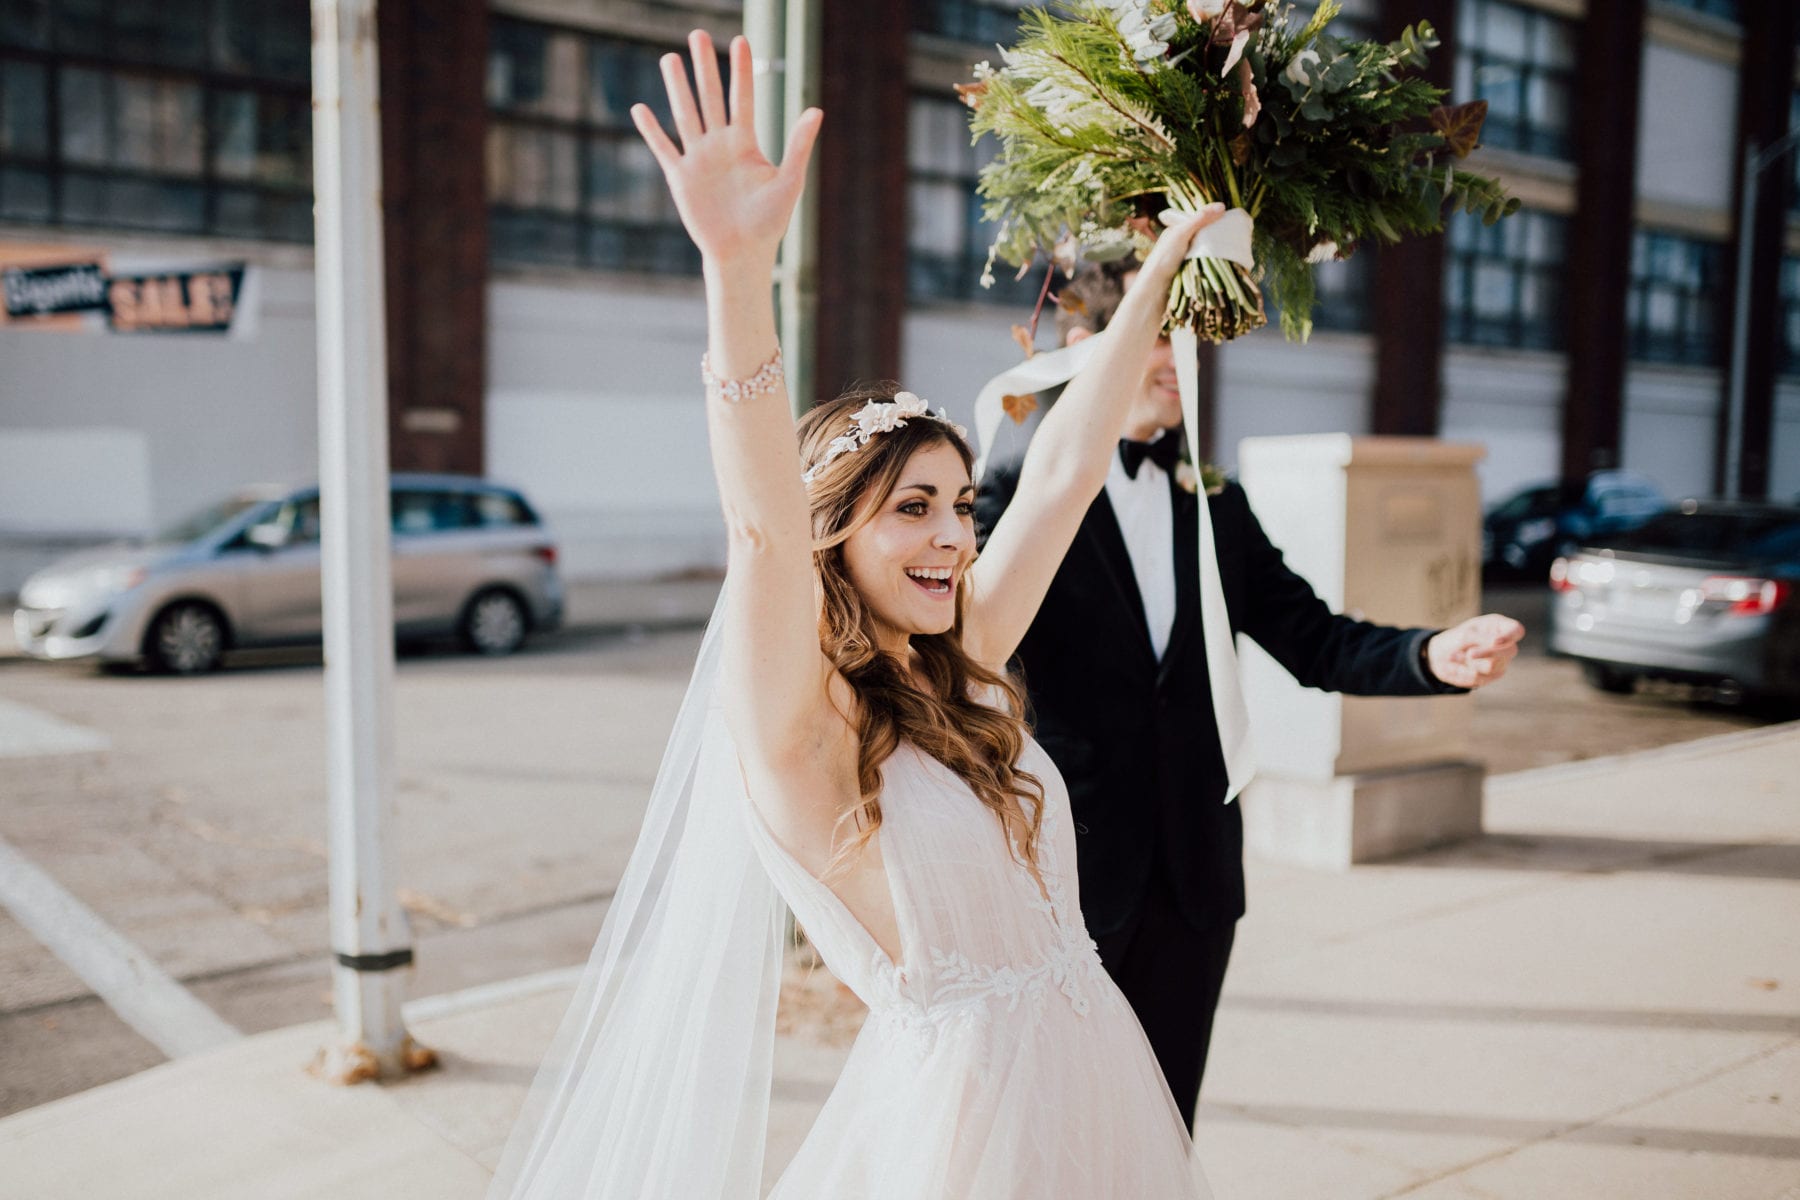 Bride cheers for her friends after ceremony